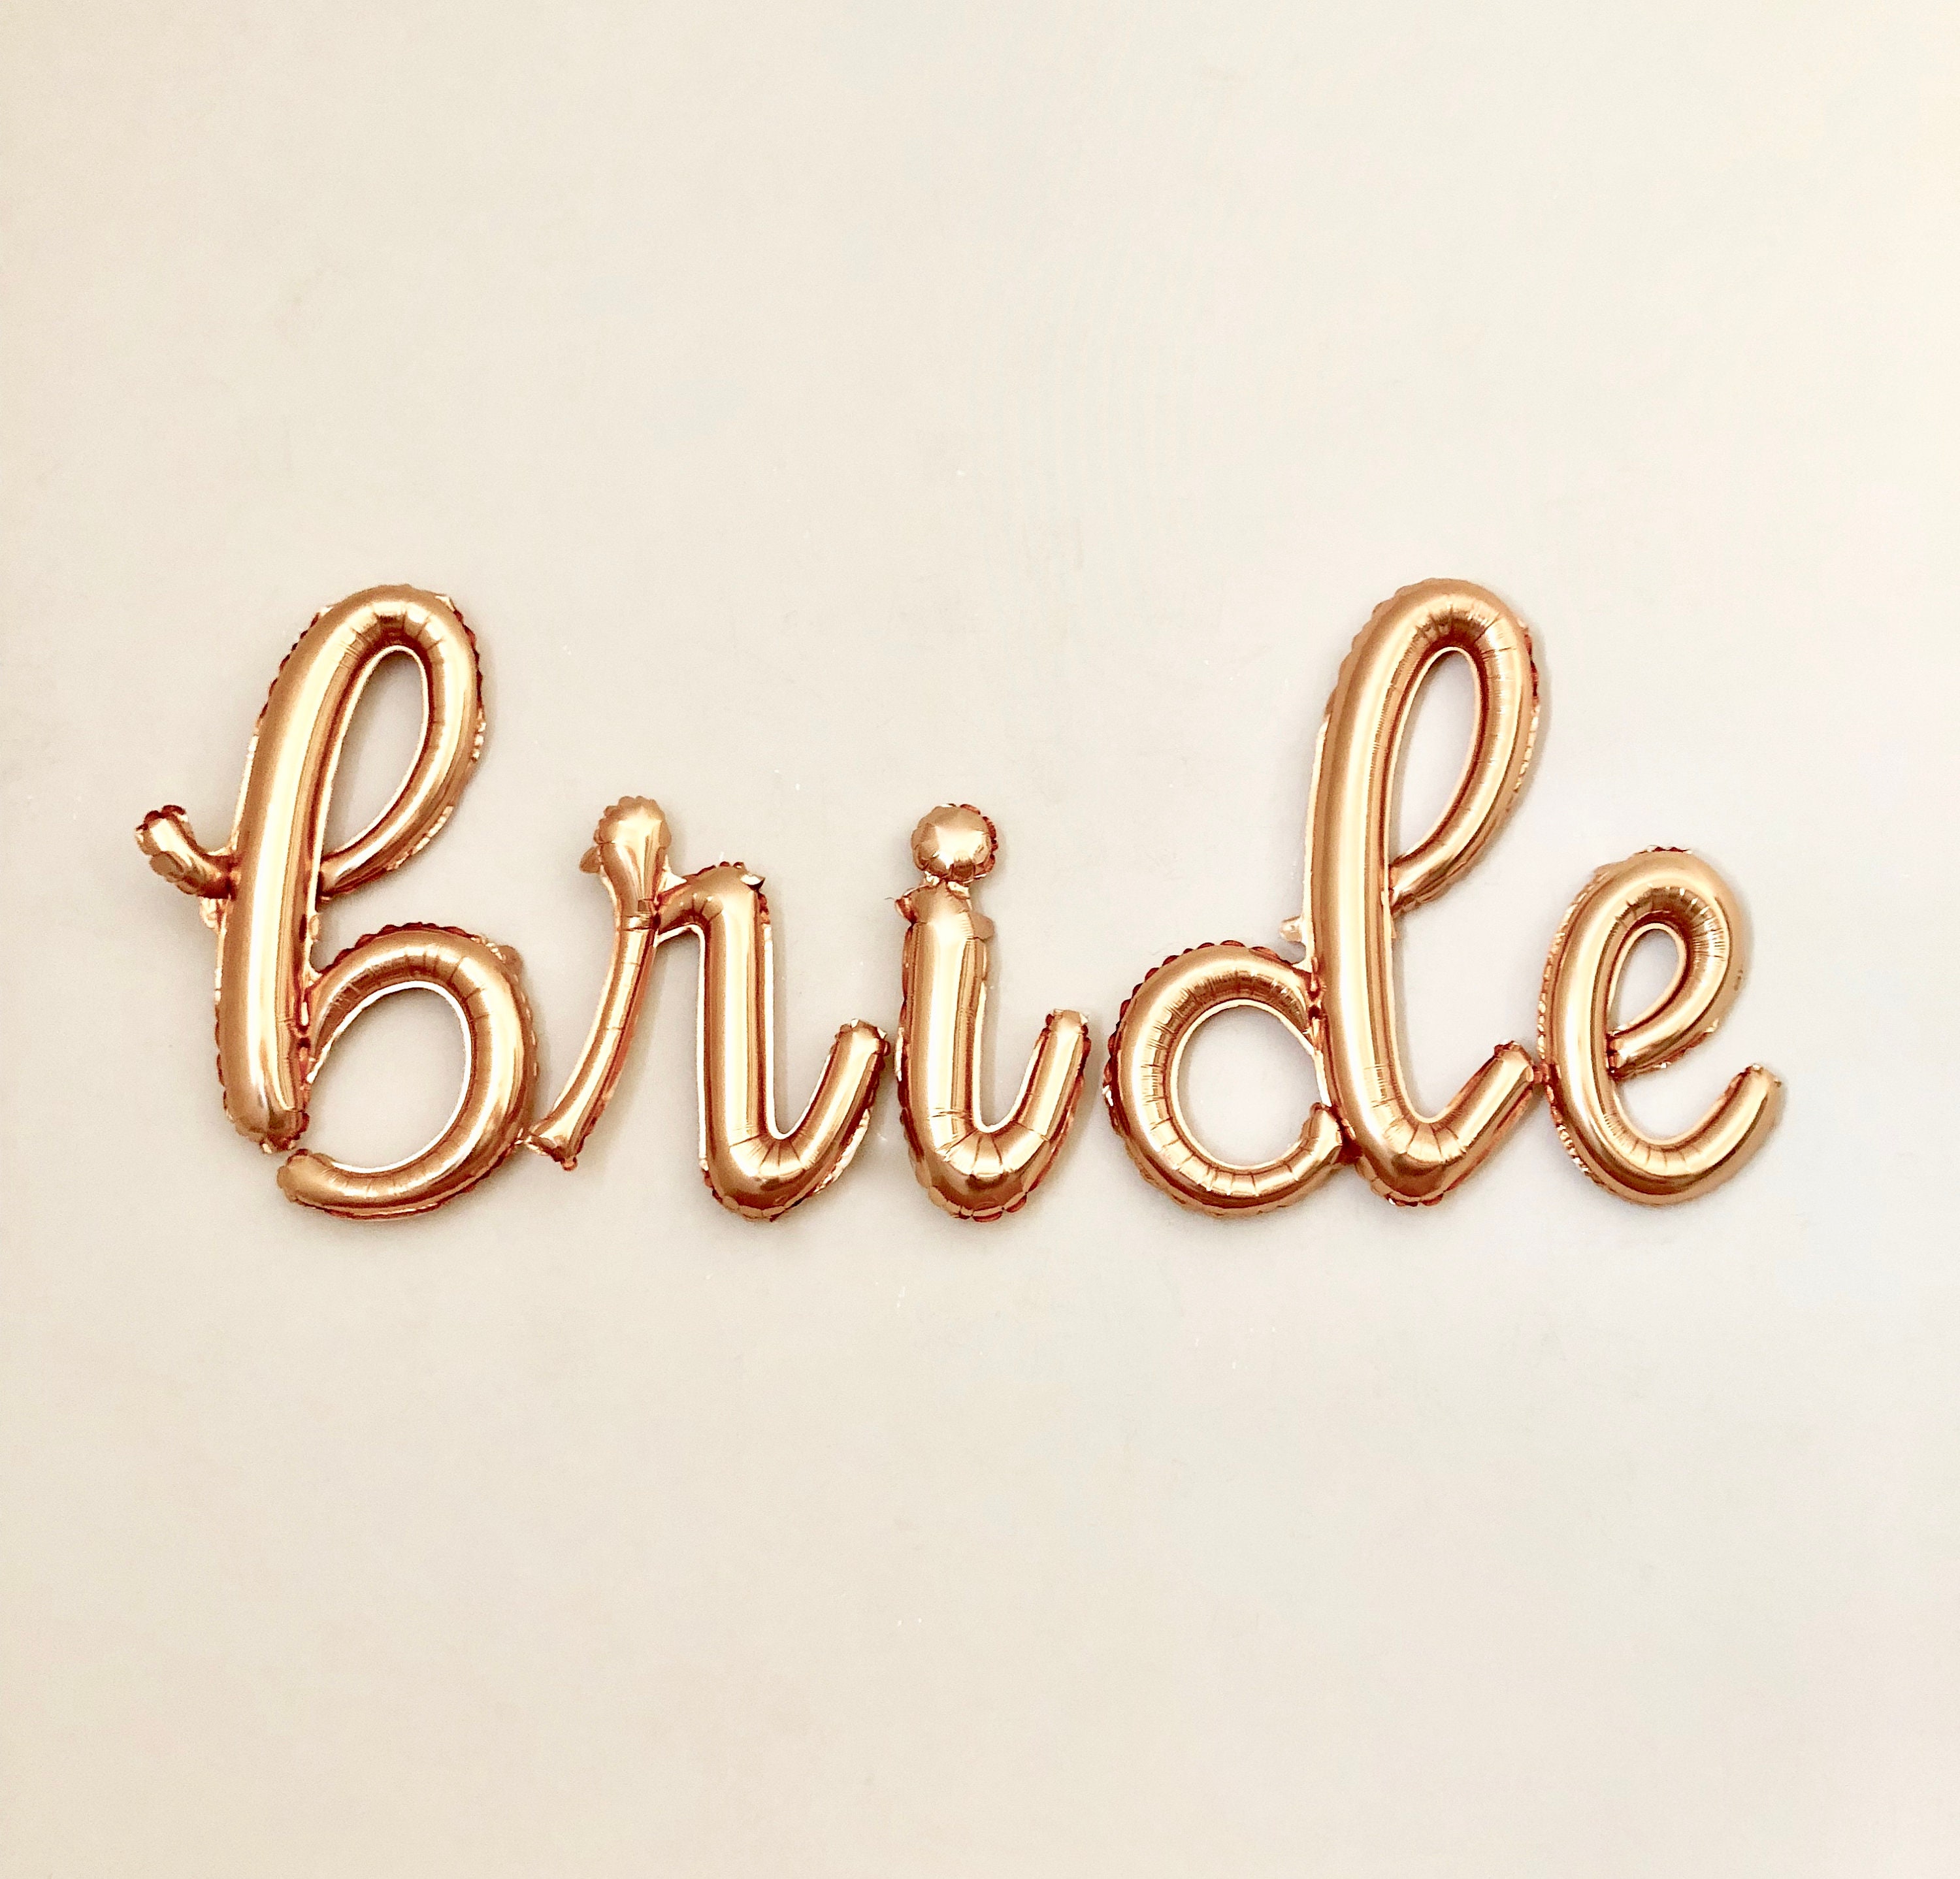 Gold Bride to be Banner 2.5ft